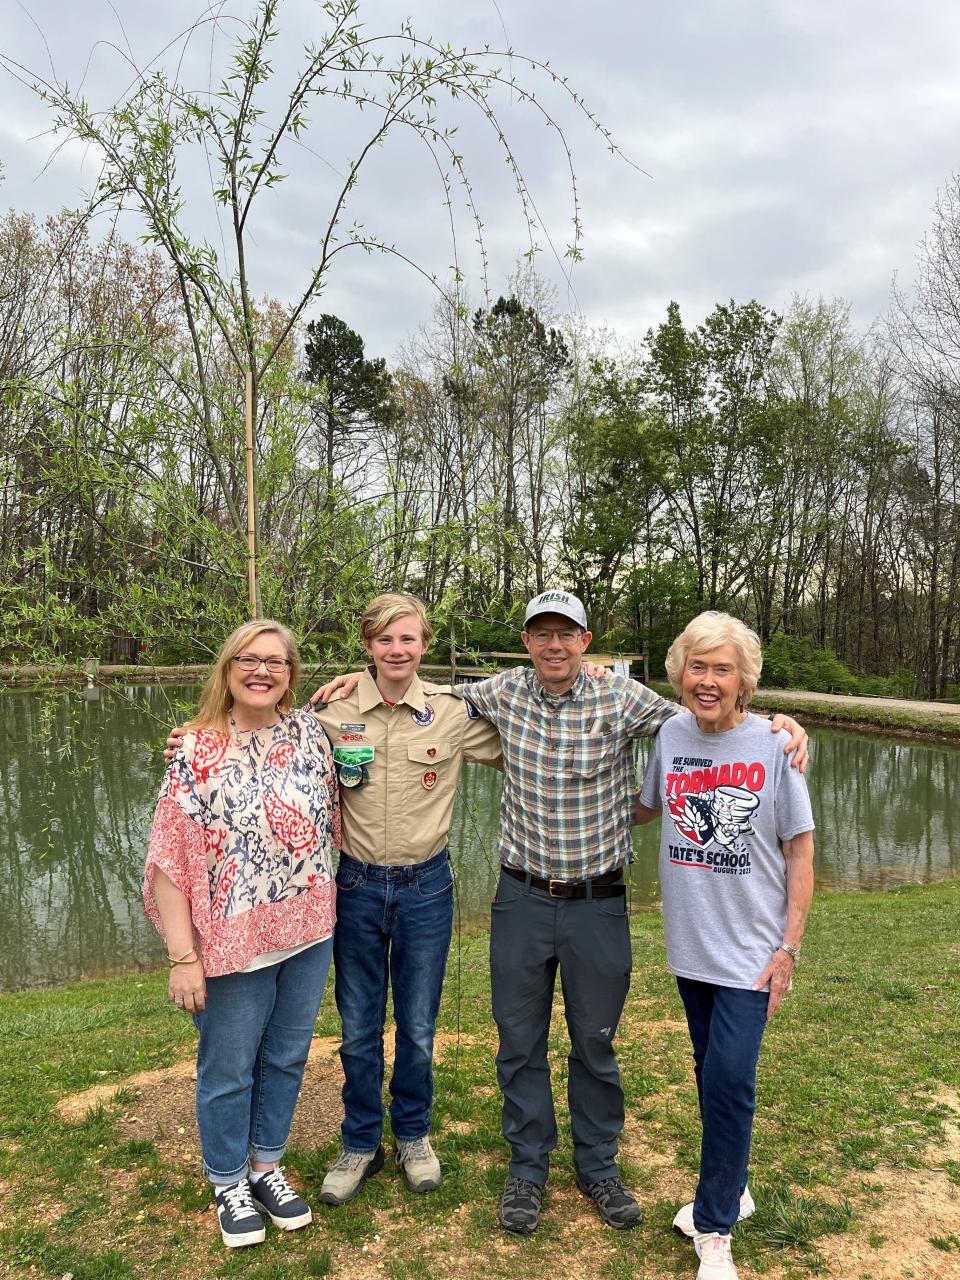 Former Tate’s School student William Patterson stands near a planted willow tree by the school’s pond with Tate’s School director of resources Tracey Van Hook, left, father Phillip Patterson, and CEO and school founder LouL Tate.